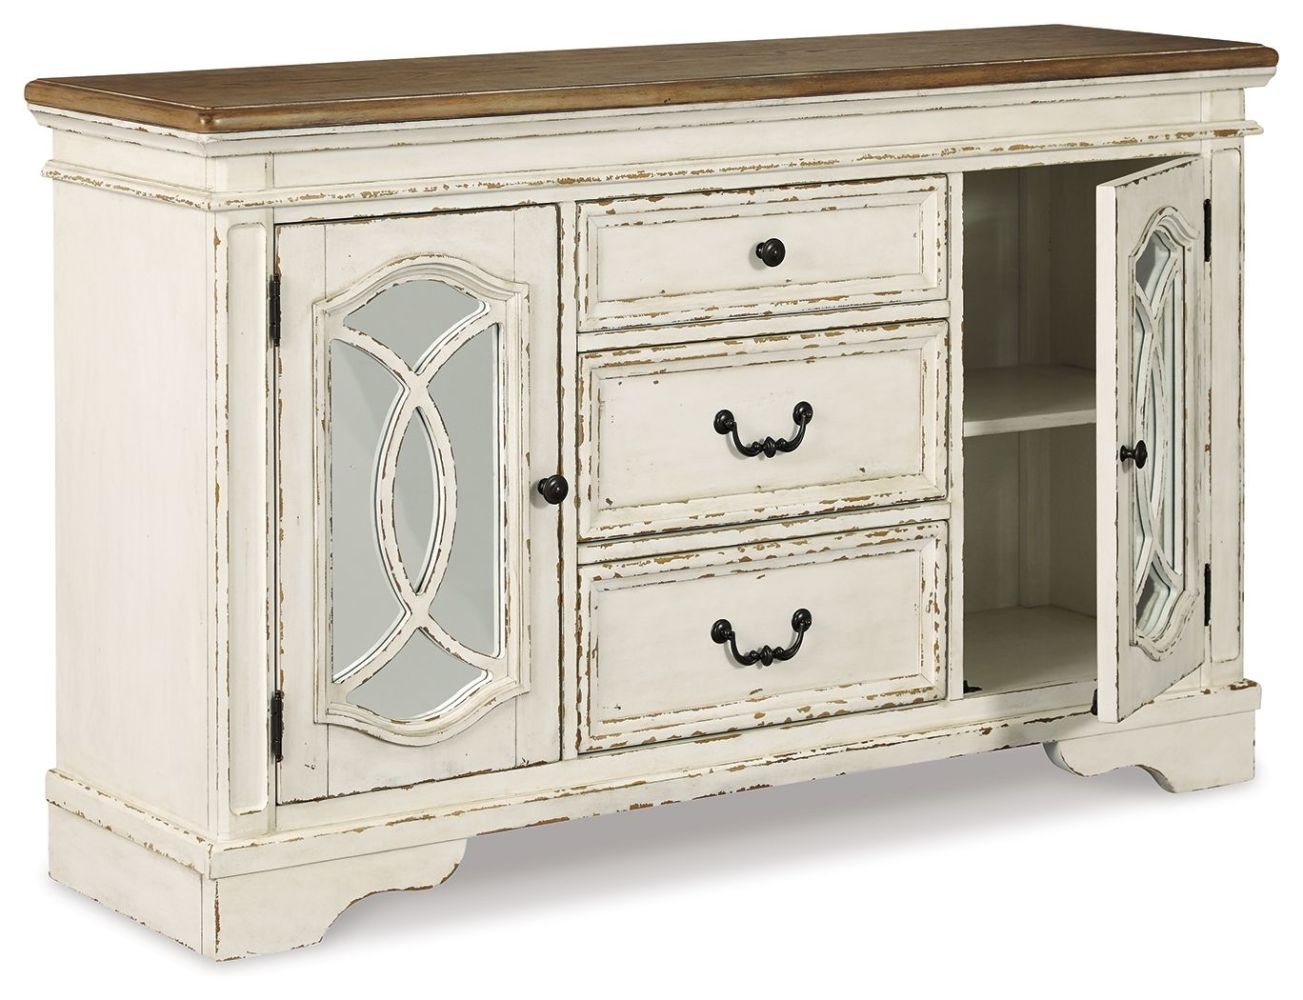 Realyn – Chipped White – Dining Room Server D743-60